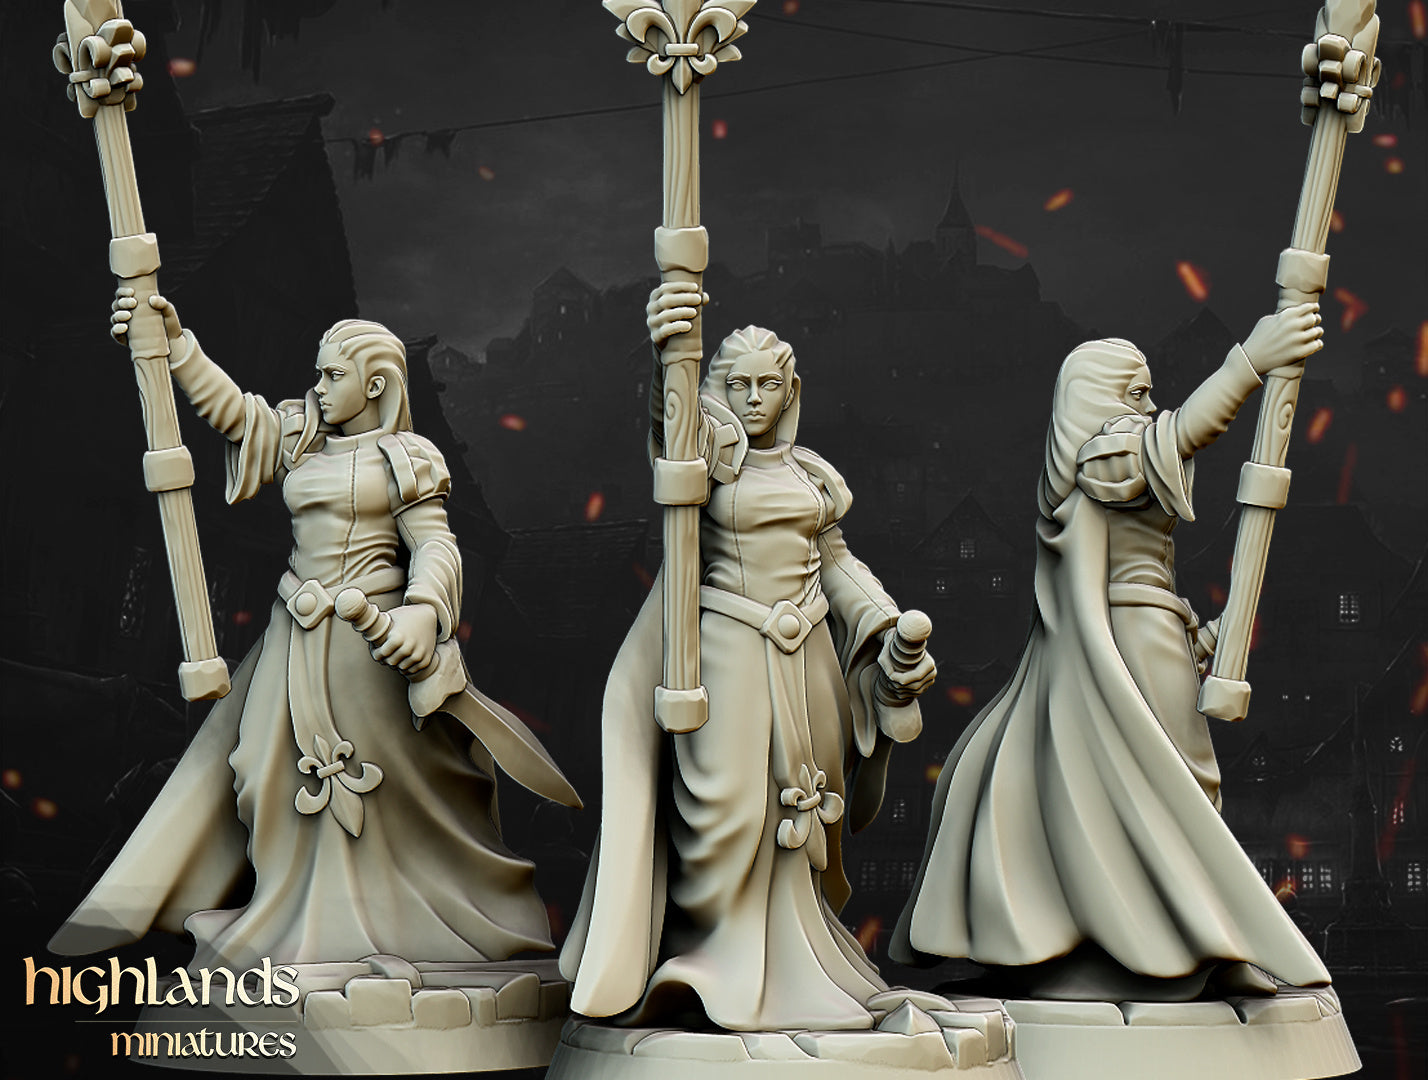 Damsel of the Lady by Highlands Miniatures